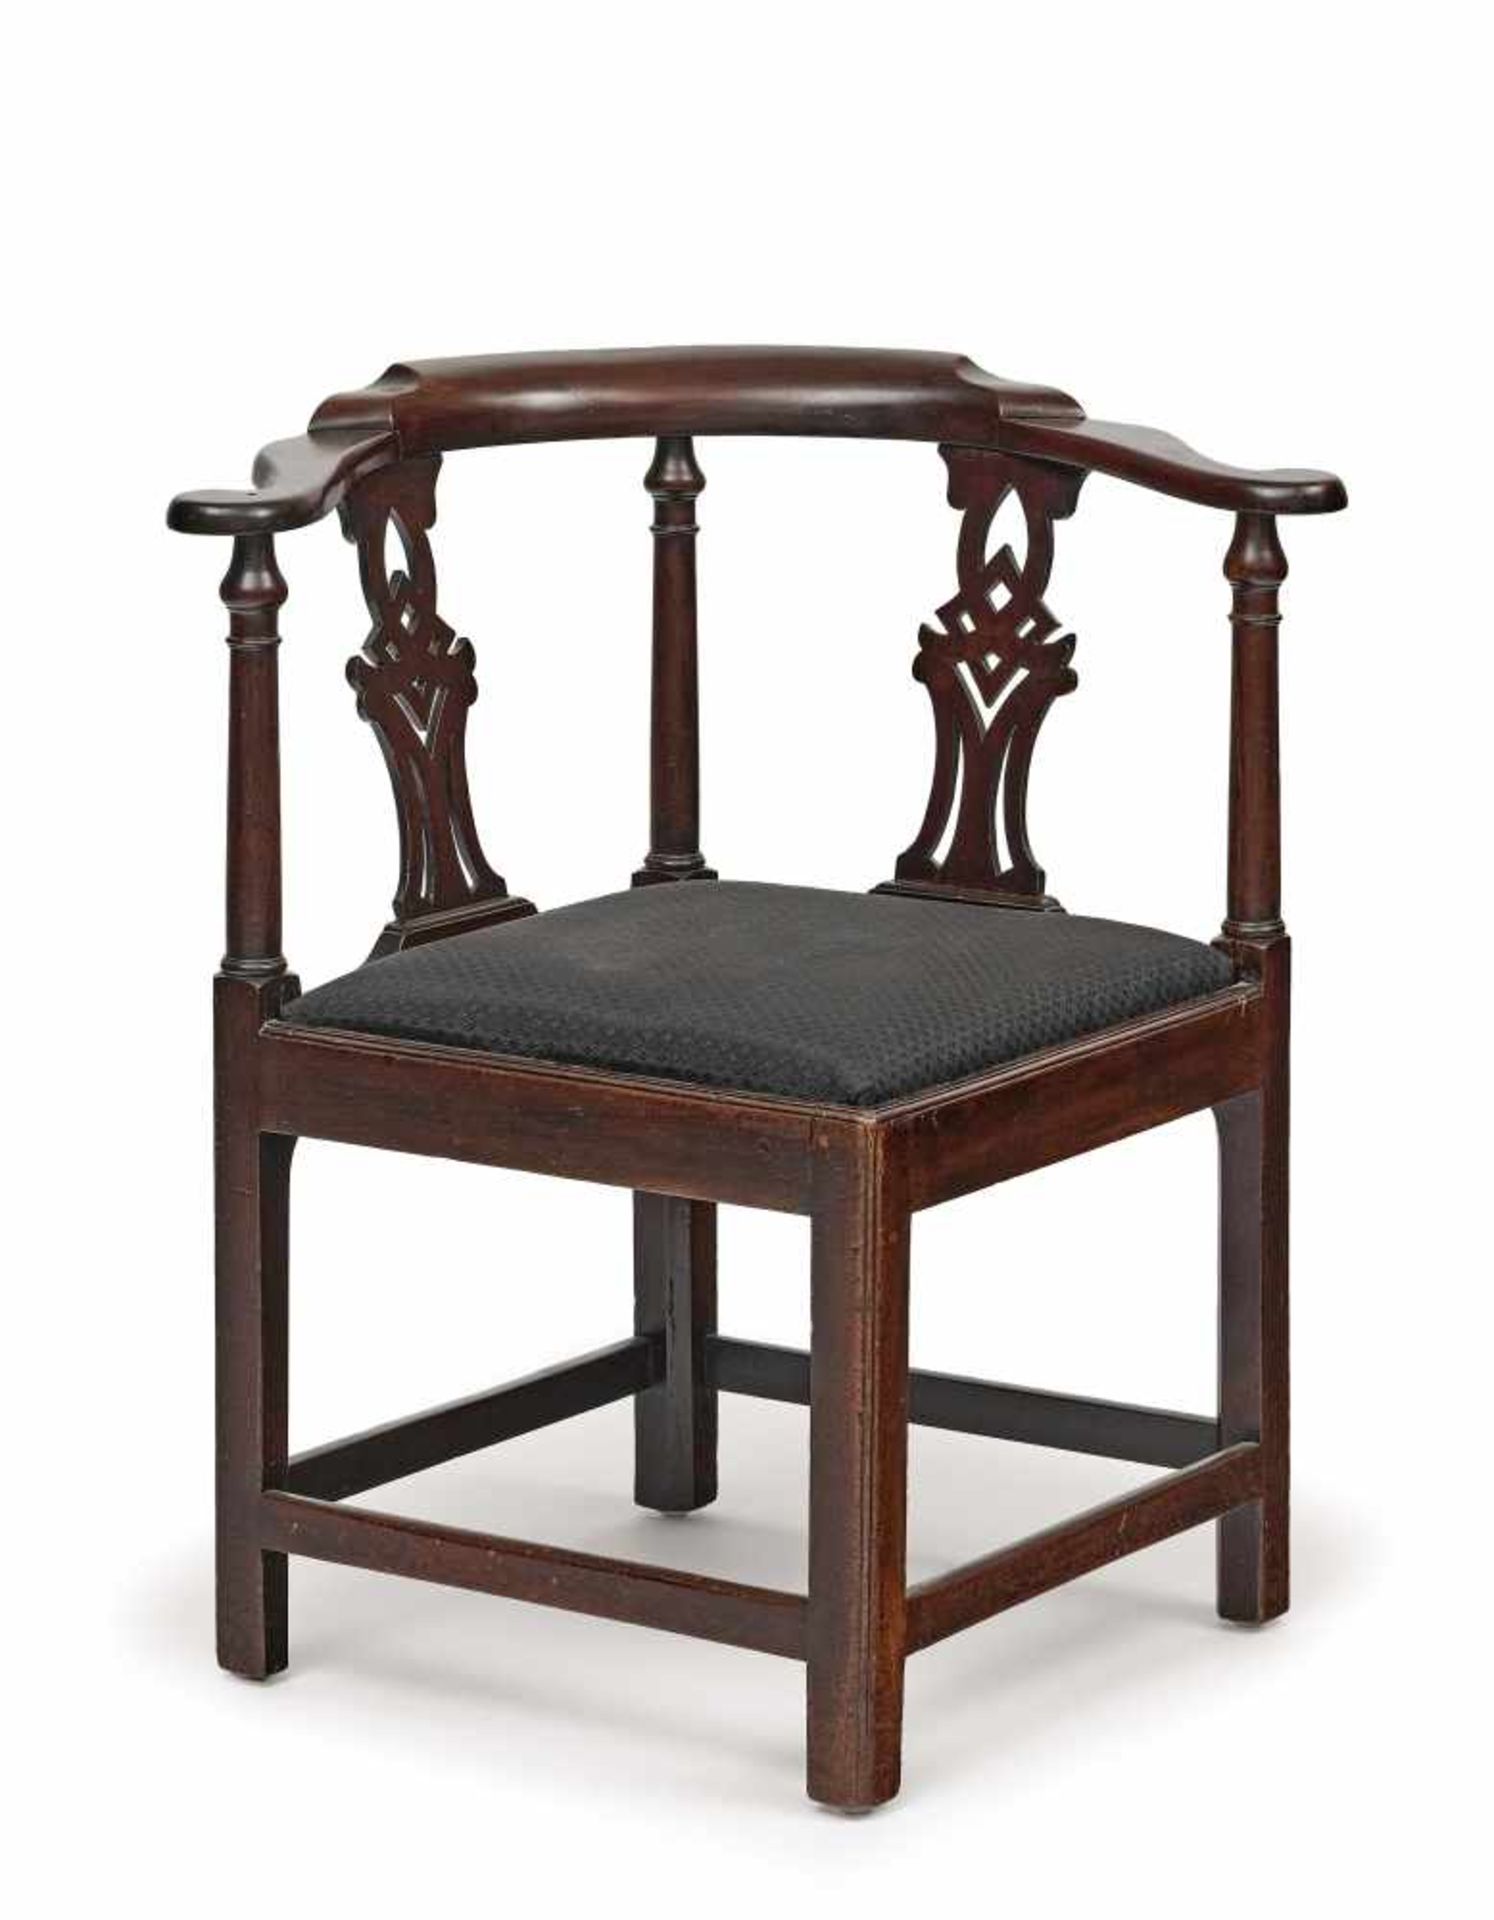 A corner chairEngland, 18th/19th century Mahogany. Restored, upholstery and cover renewed. 80 x 49 x